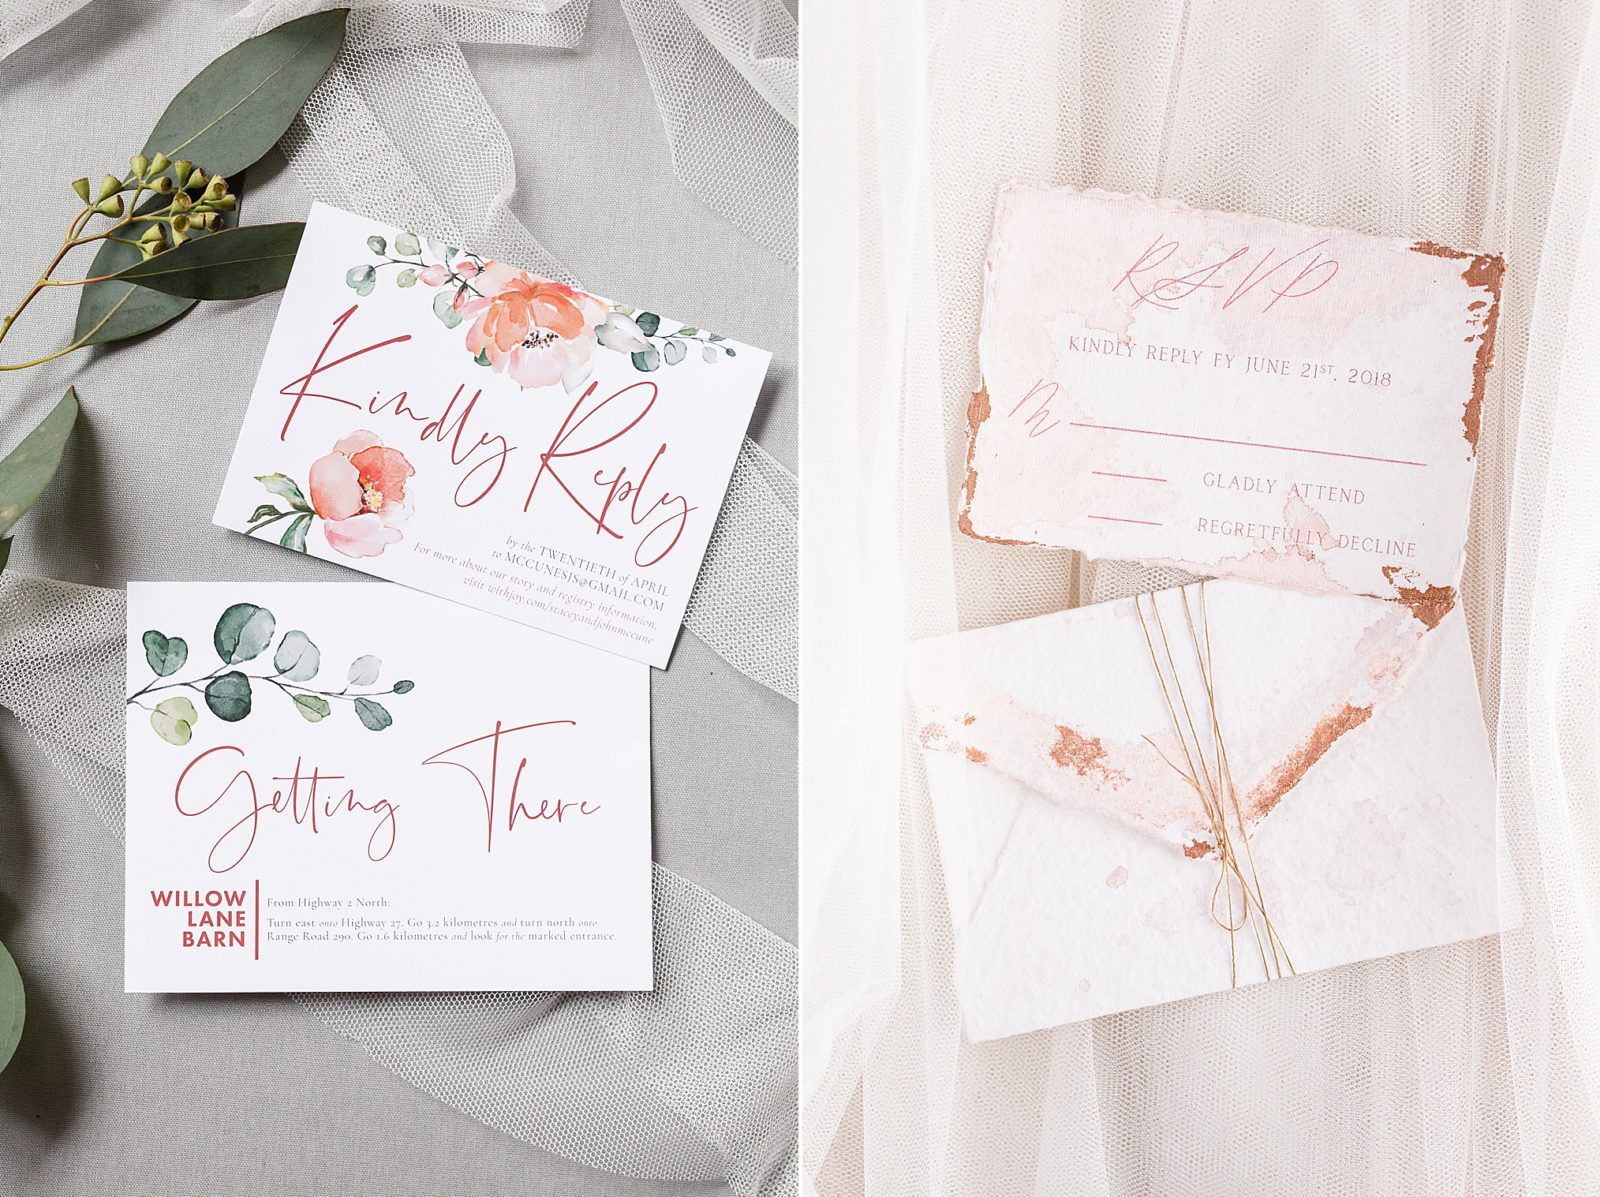 RSVP card examples